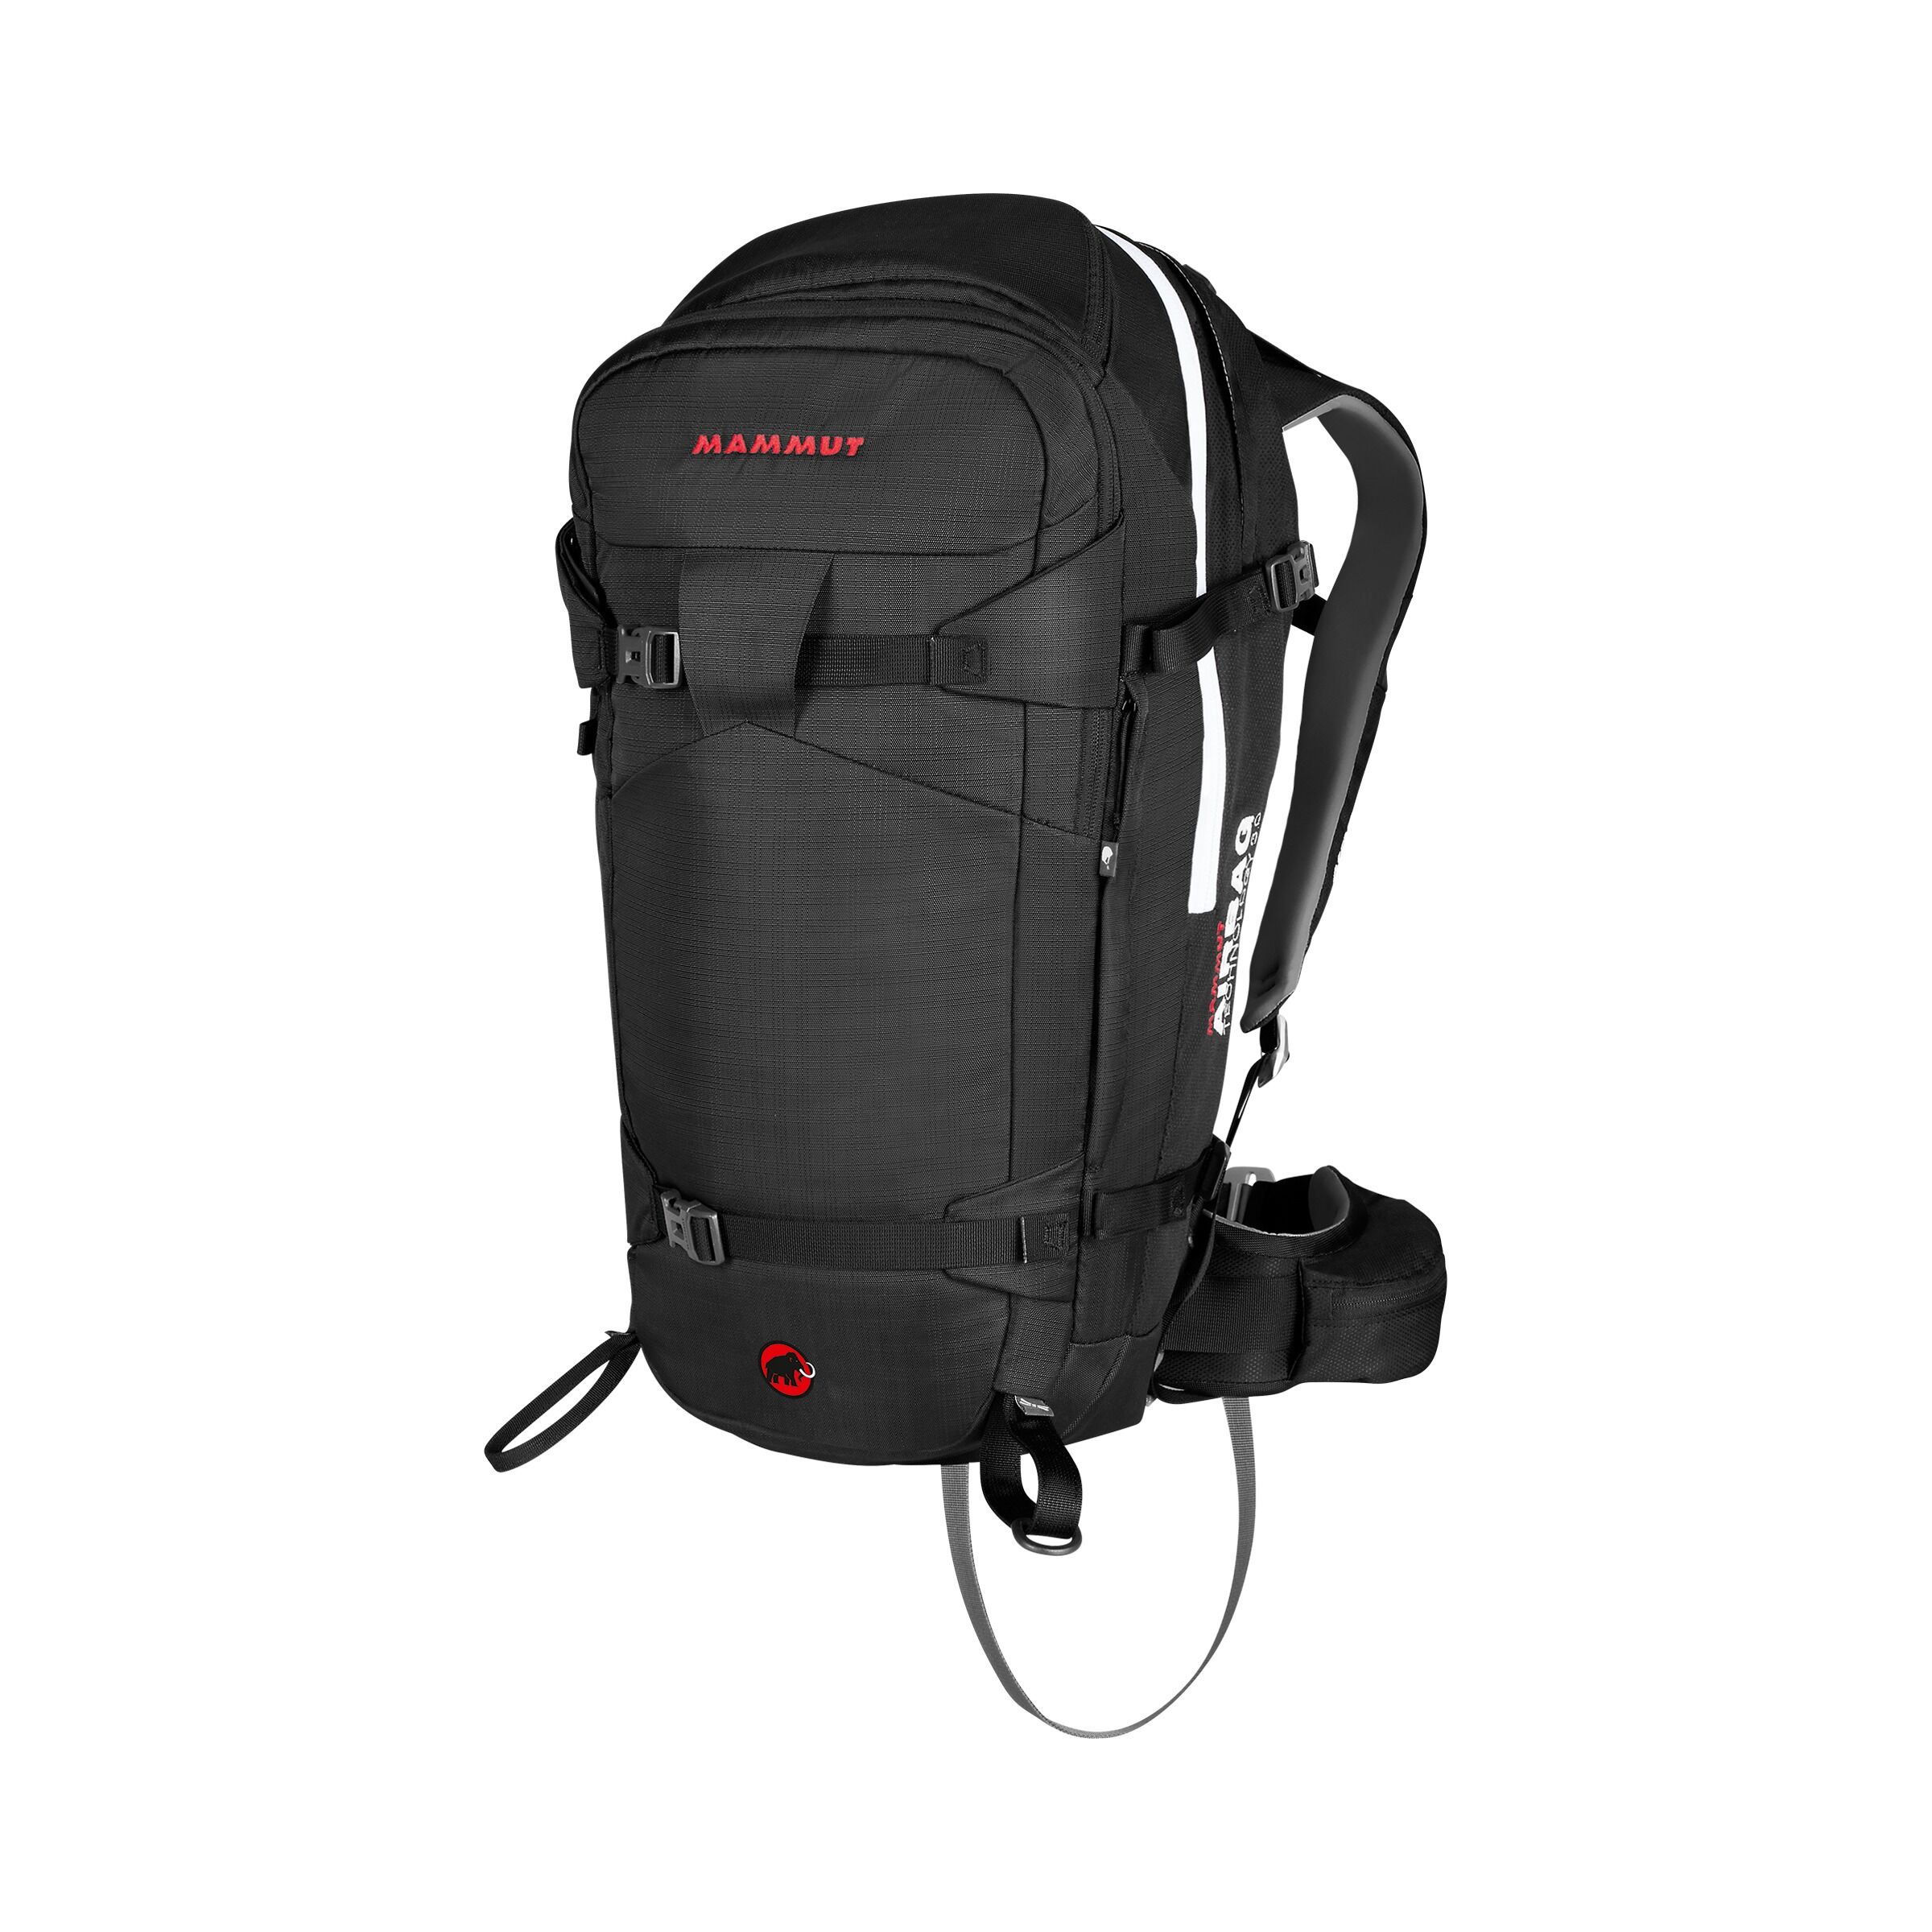 Mammut Pro Removable Airbag 3.0 - Avalanche backpack